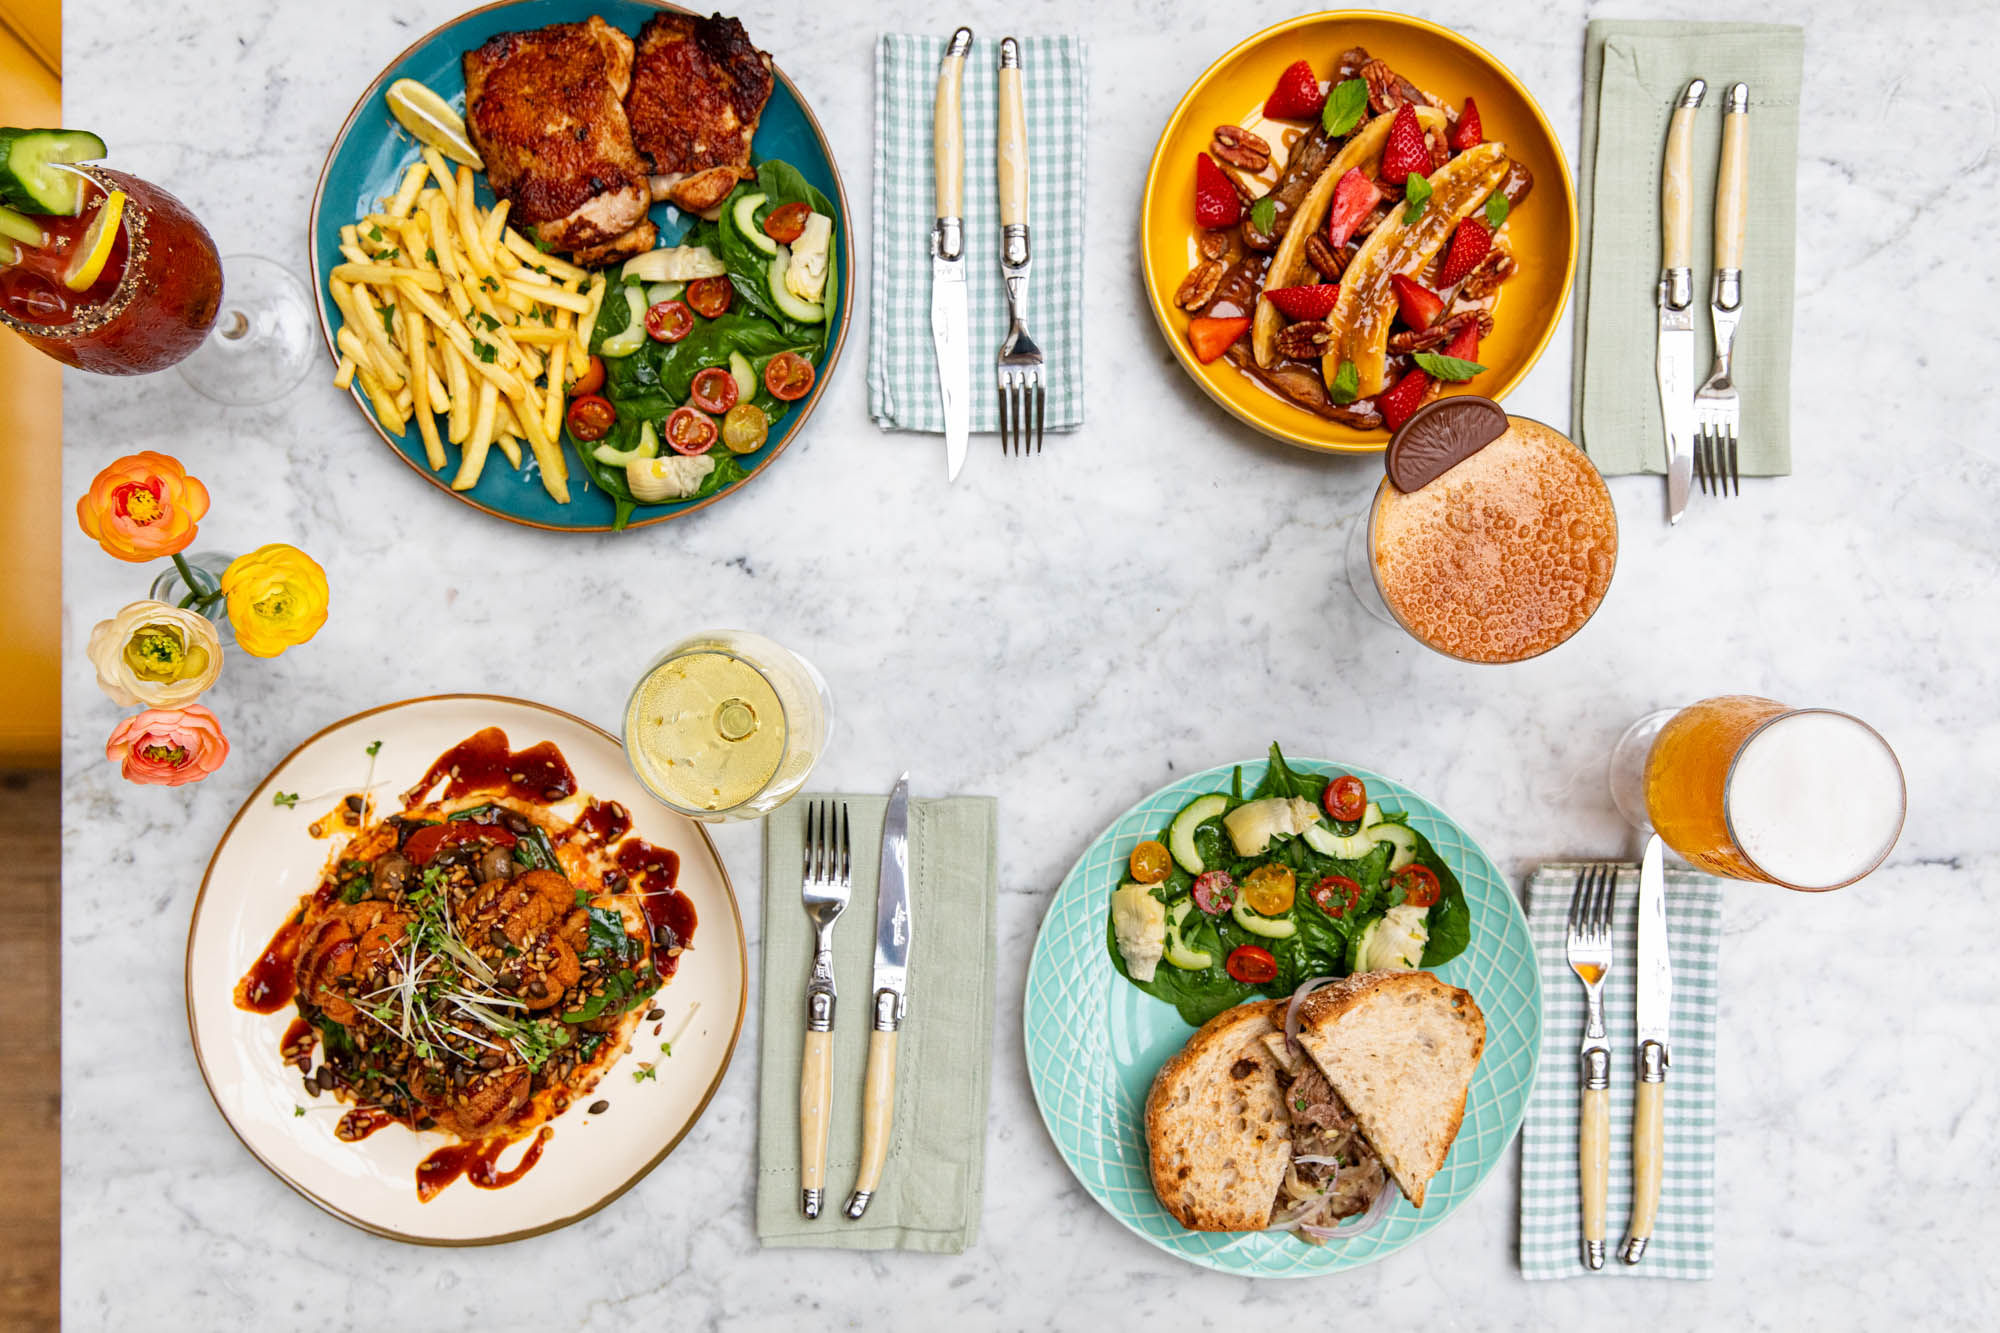 Plates of food photographed from above on a marble table. This is lunch at Jo and Co